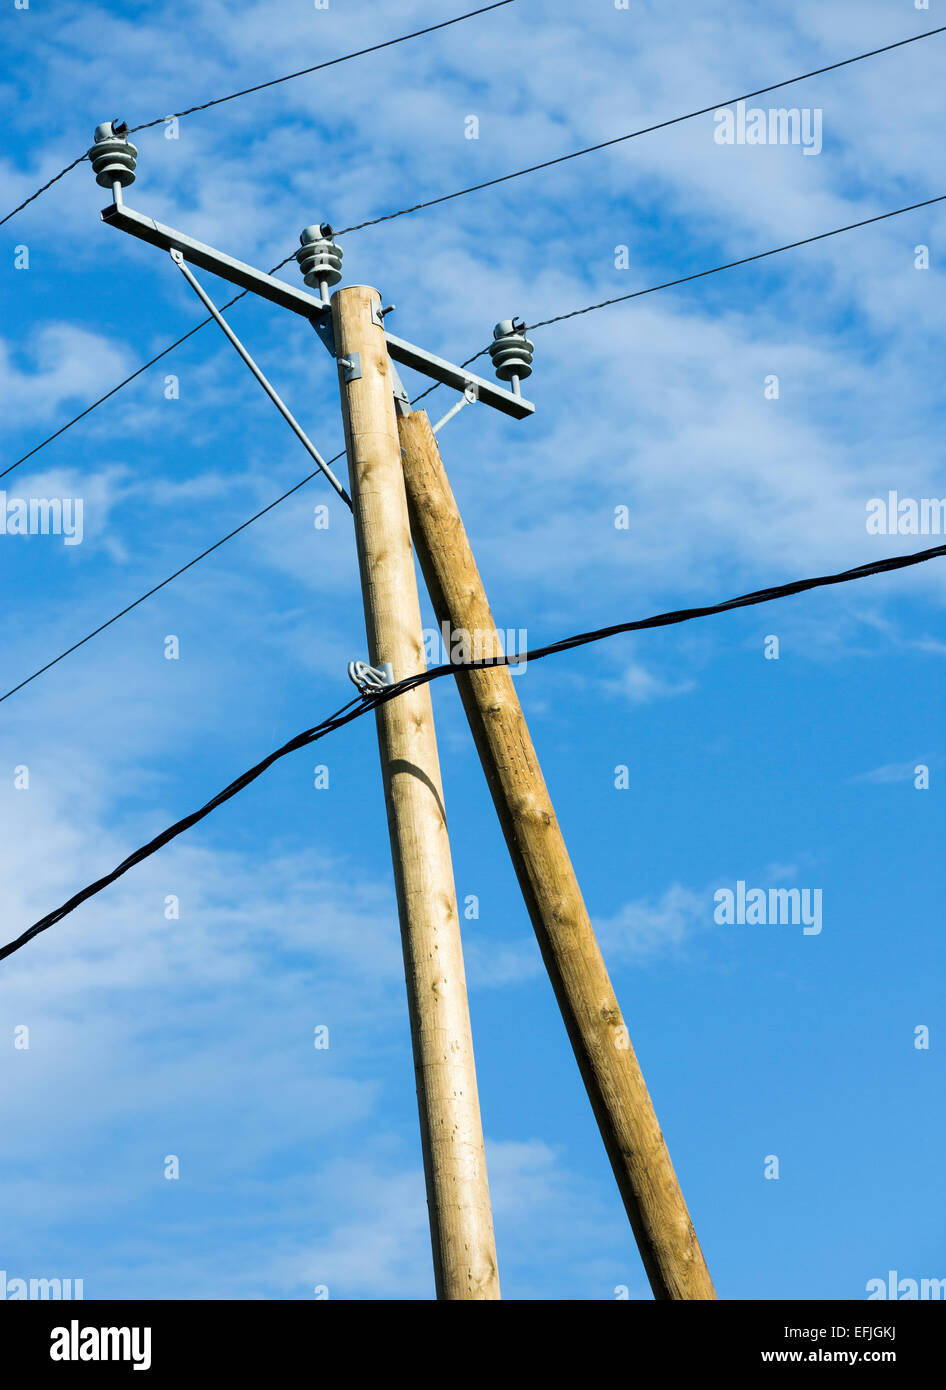 New wooden utility pole with power line wires , cross arm and insulators  against blue sky , Finland Stock Photo - Alamy